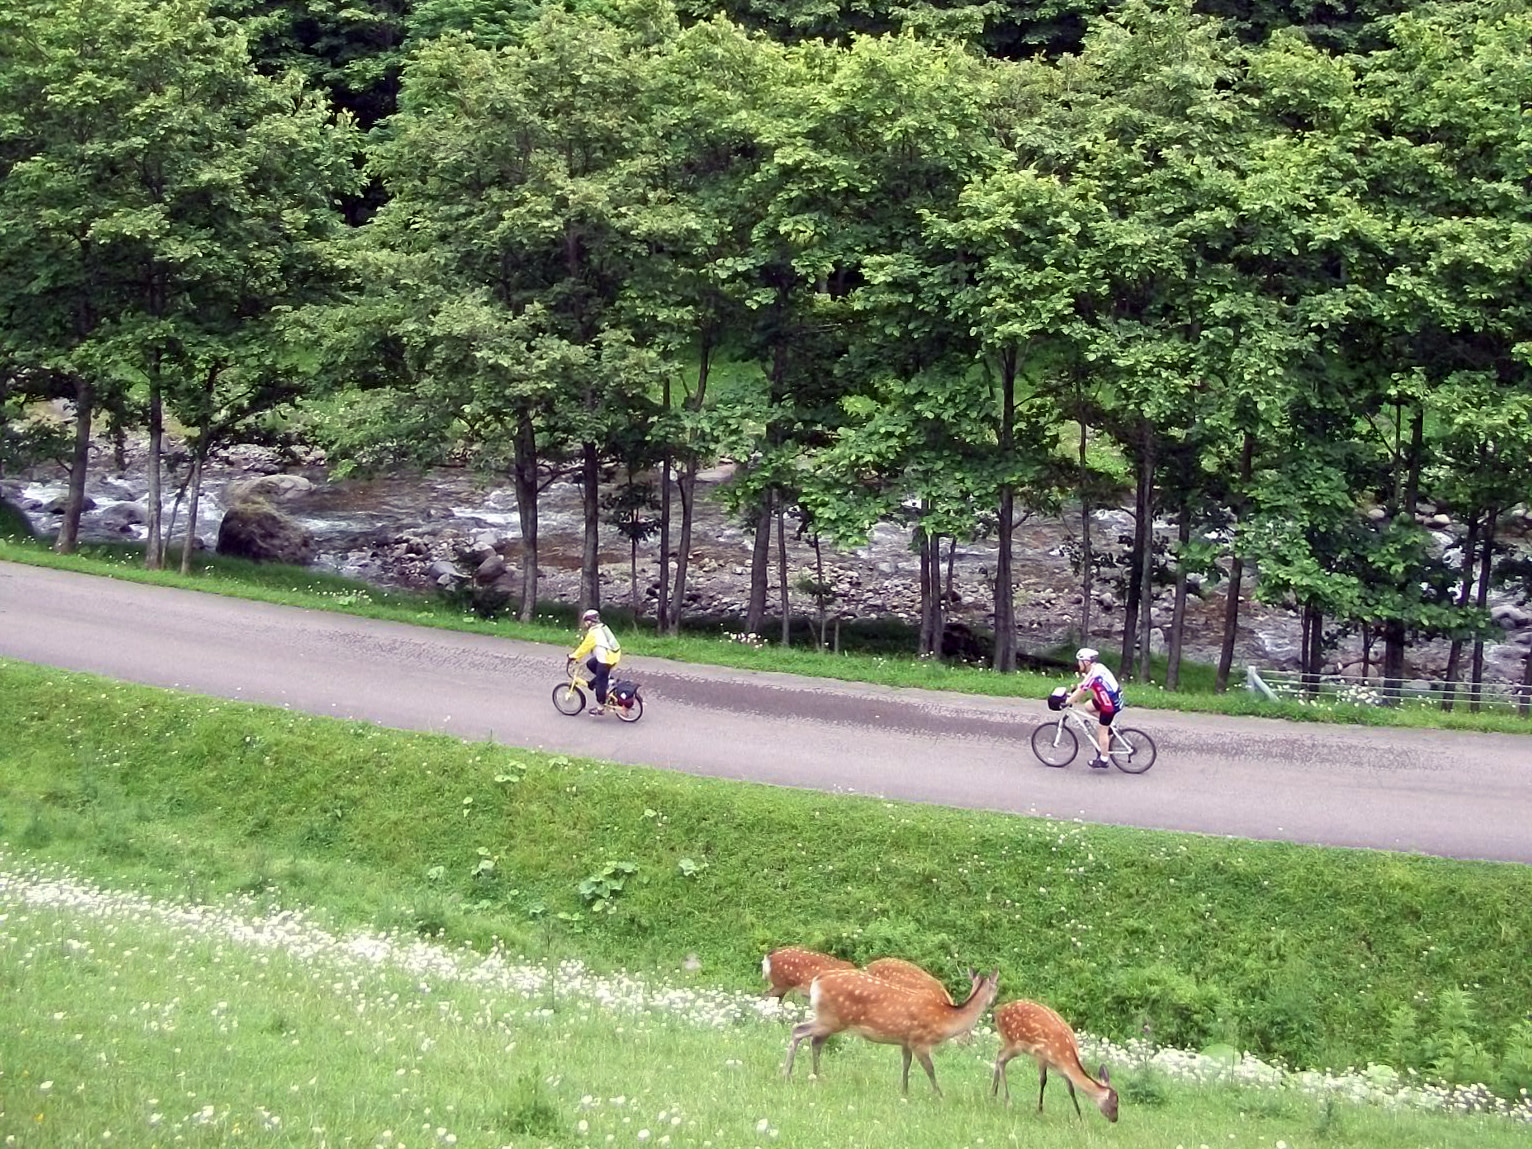 Two cyclists pass by four deer in their summer coats.